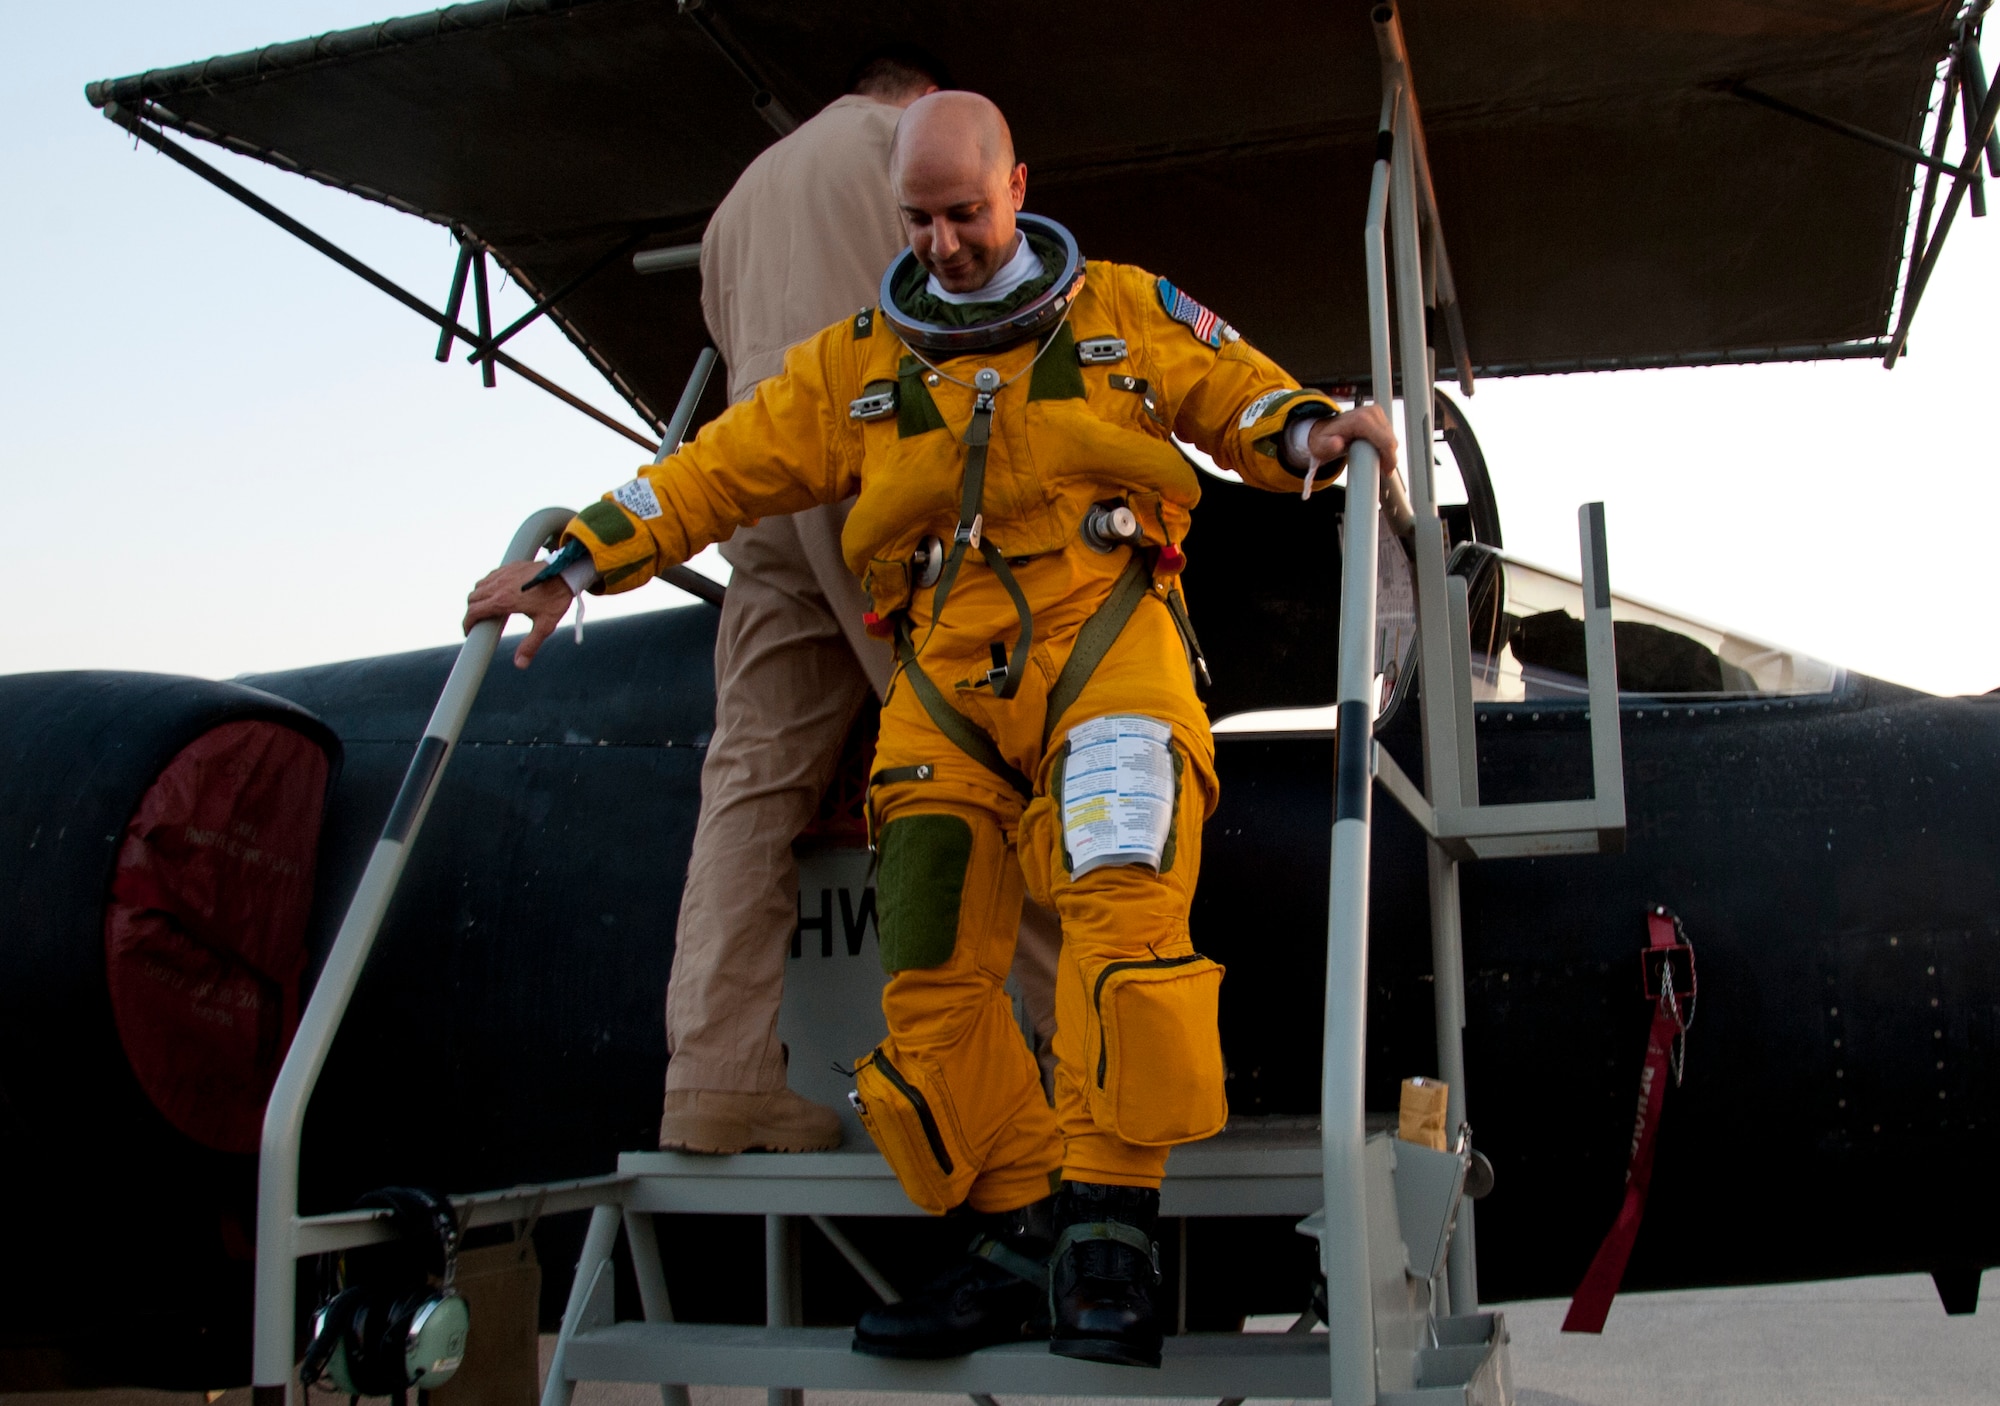 Air Force Maj. Ralph Shoukry, a pilot and tactics and employment lead assigned to the 99th Expeditionary Reconnaissance Squadron, steps off of a U-2 Dragonlady at an undisclosed location in Southwest Asia, March 6, 2014. Shoukry just passed more than 1,000 combat flying hours. (U.S. Air Force photo by Staff Sgt. Michael Means/Released)